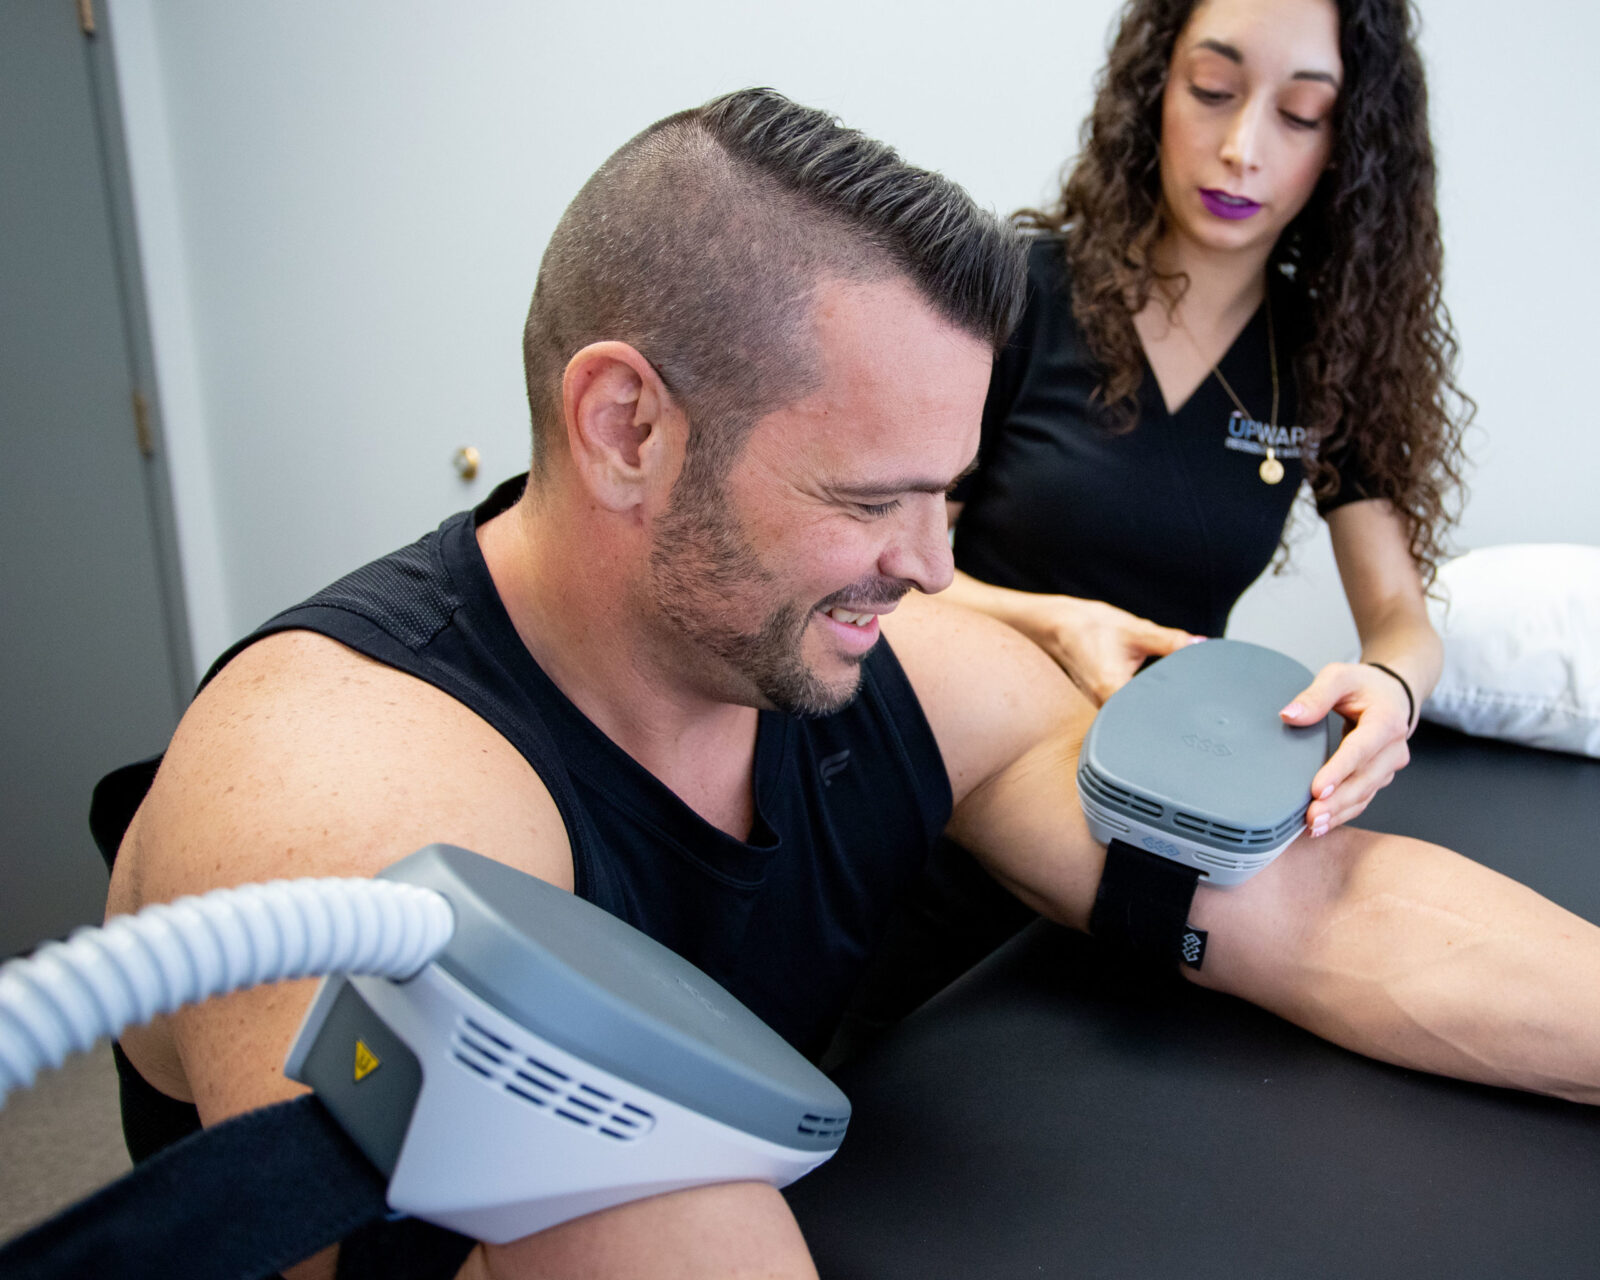 male patient with emsculpt neo body sculpting device on each bicep being aided by female medical professional